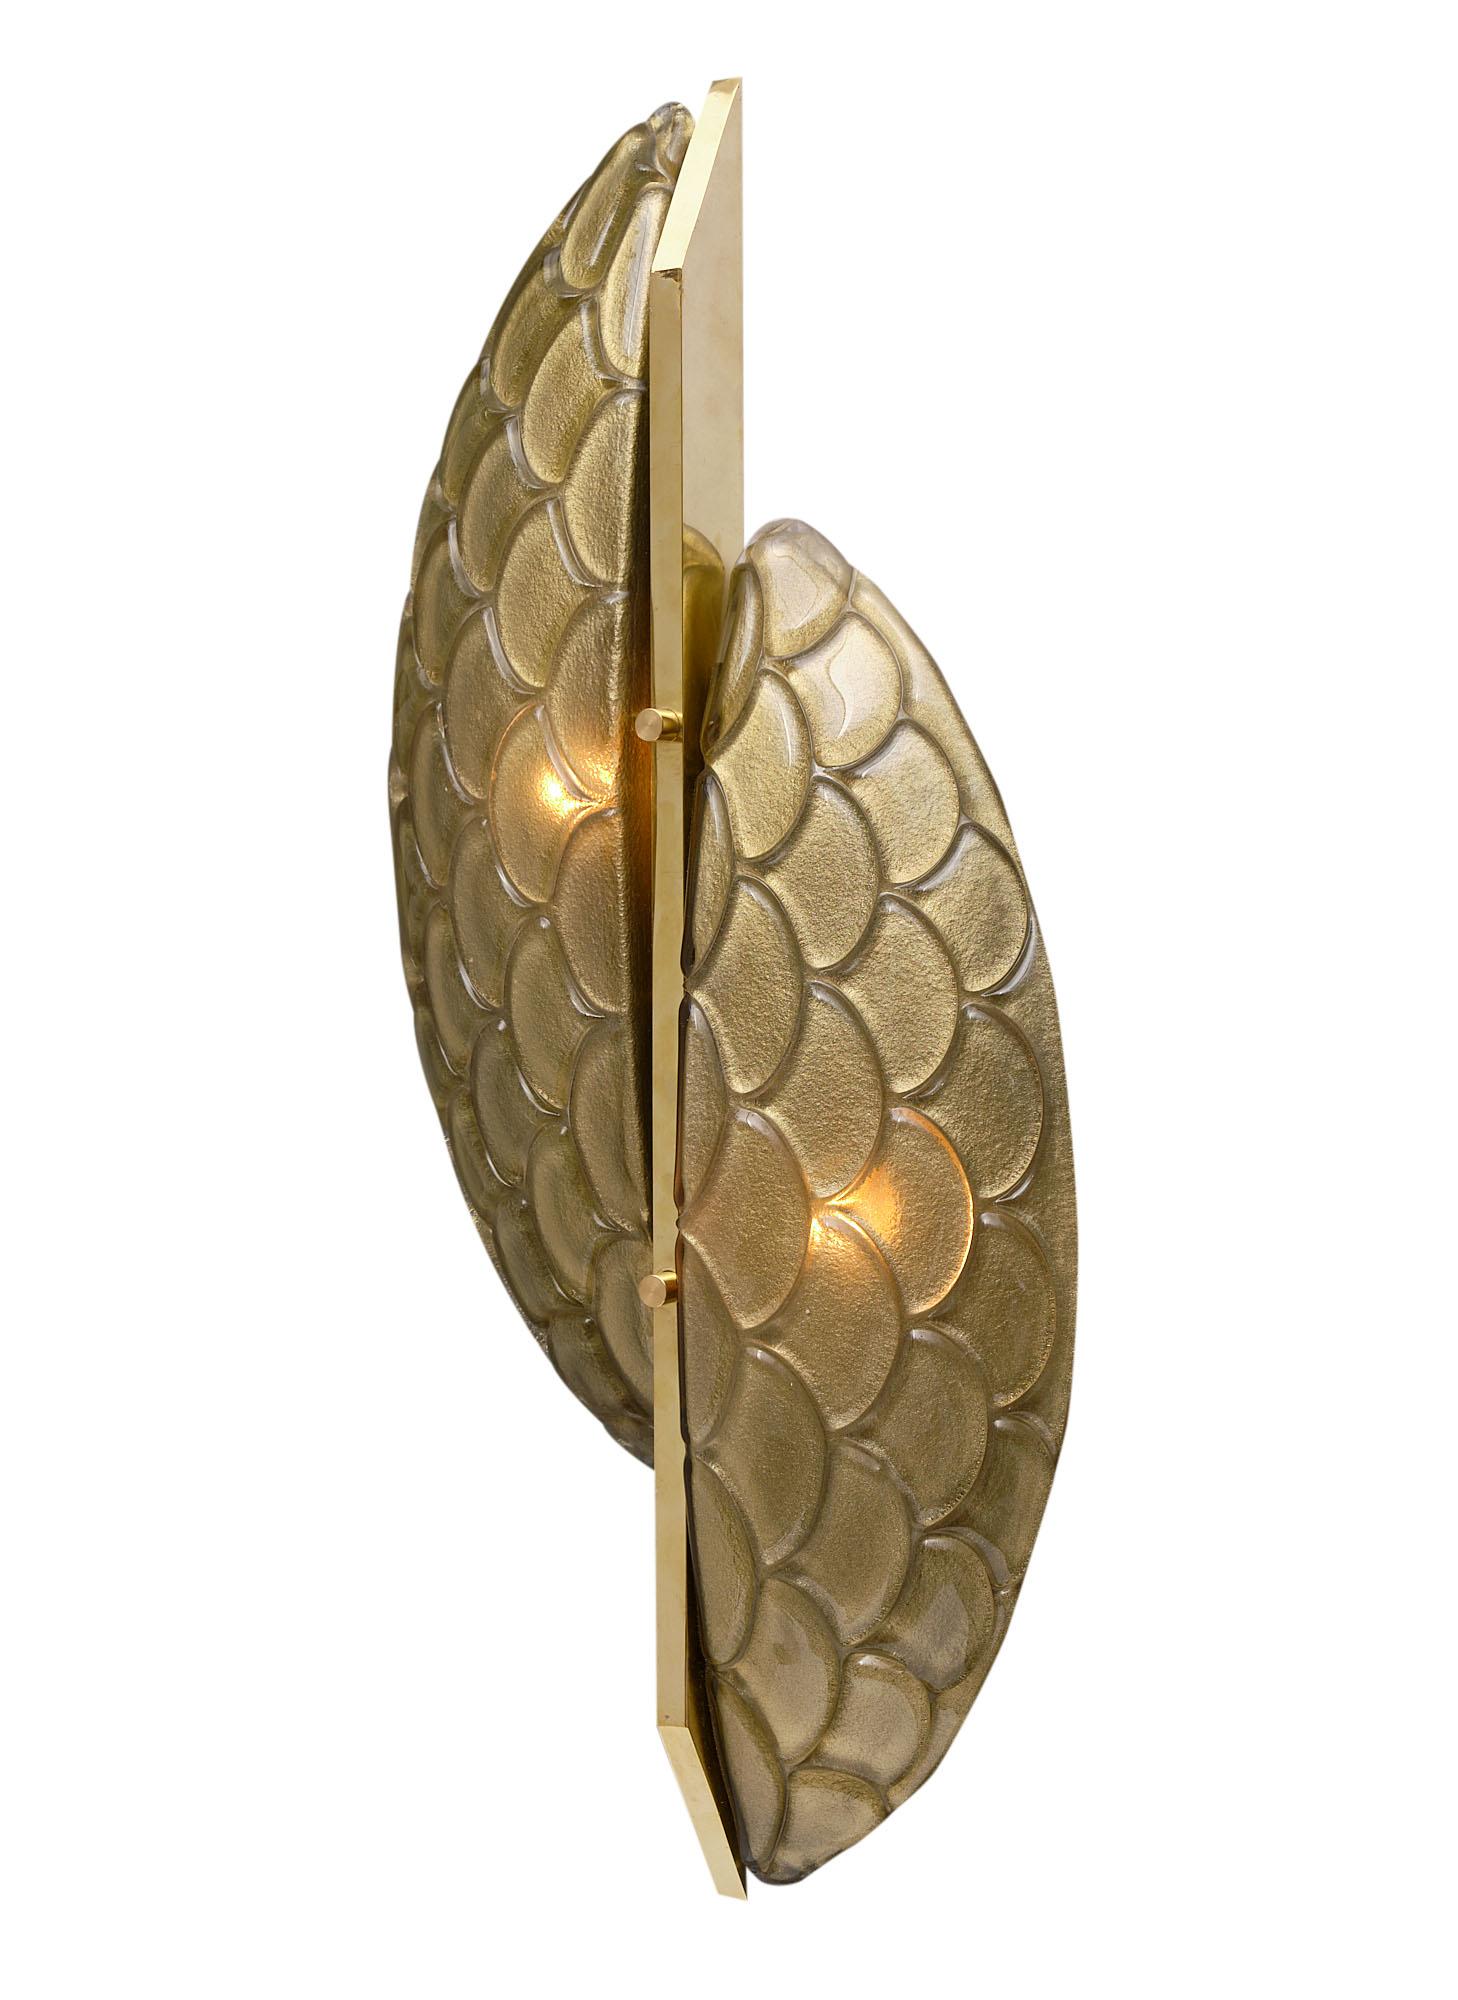 Pair of sconces from the island of Murano in Italy. Each features two stylized hand-blown glass half-moons facing each other joined by a solid brass structure. They have been newly wired to fit US standards.